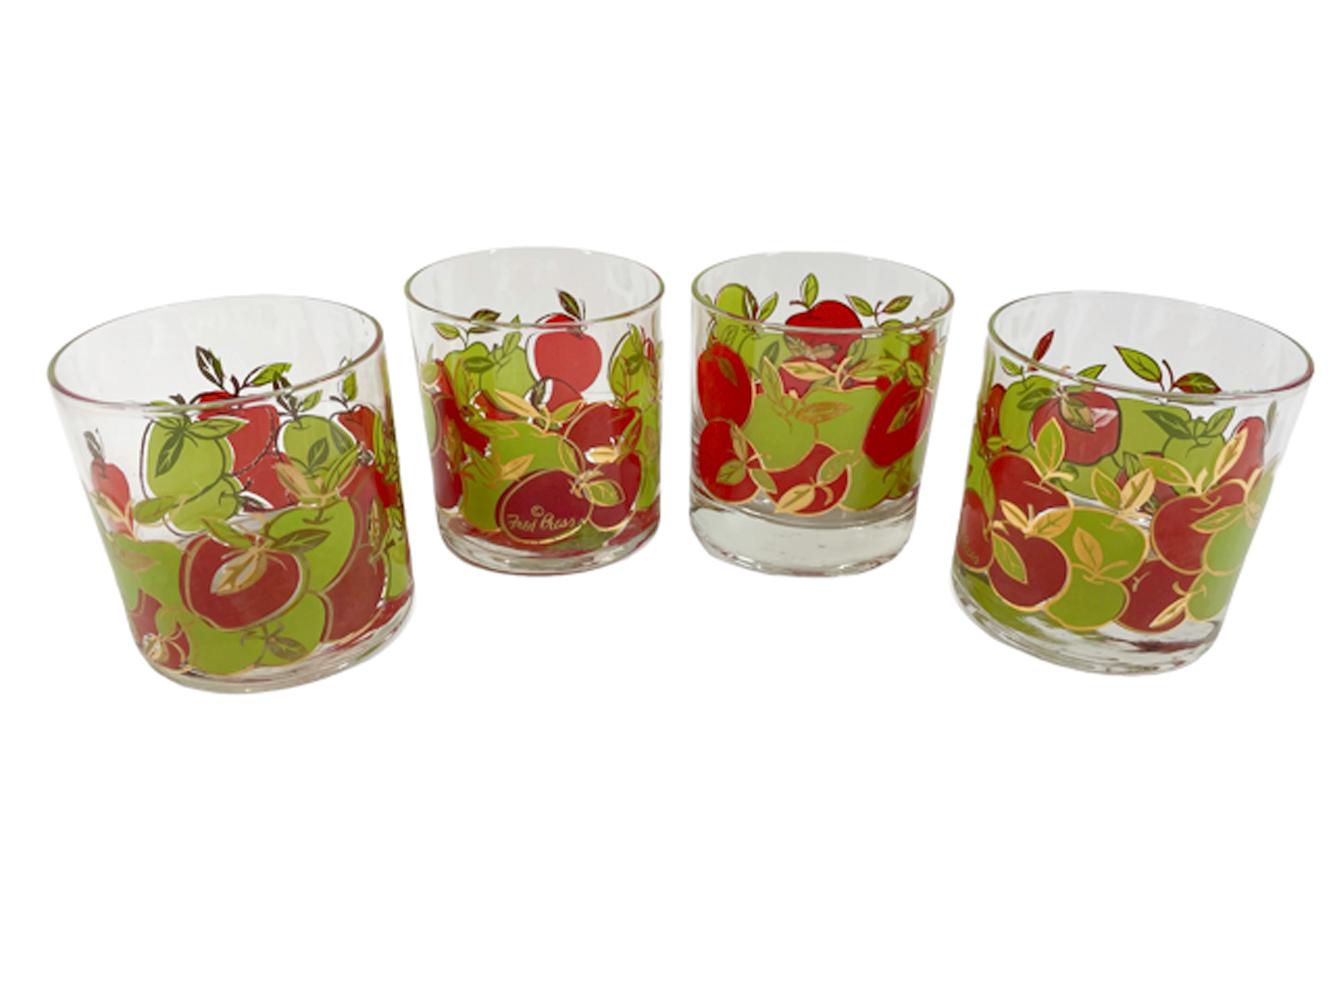 Four Fred Press designed mid-century modern rocks glasses with red and green apples having 22k gold details